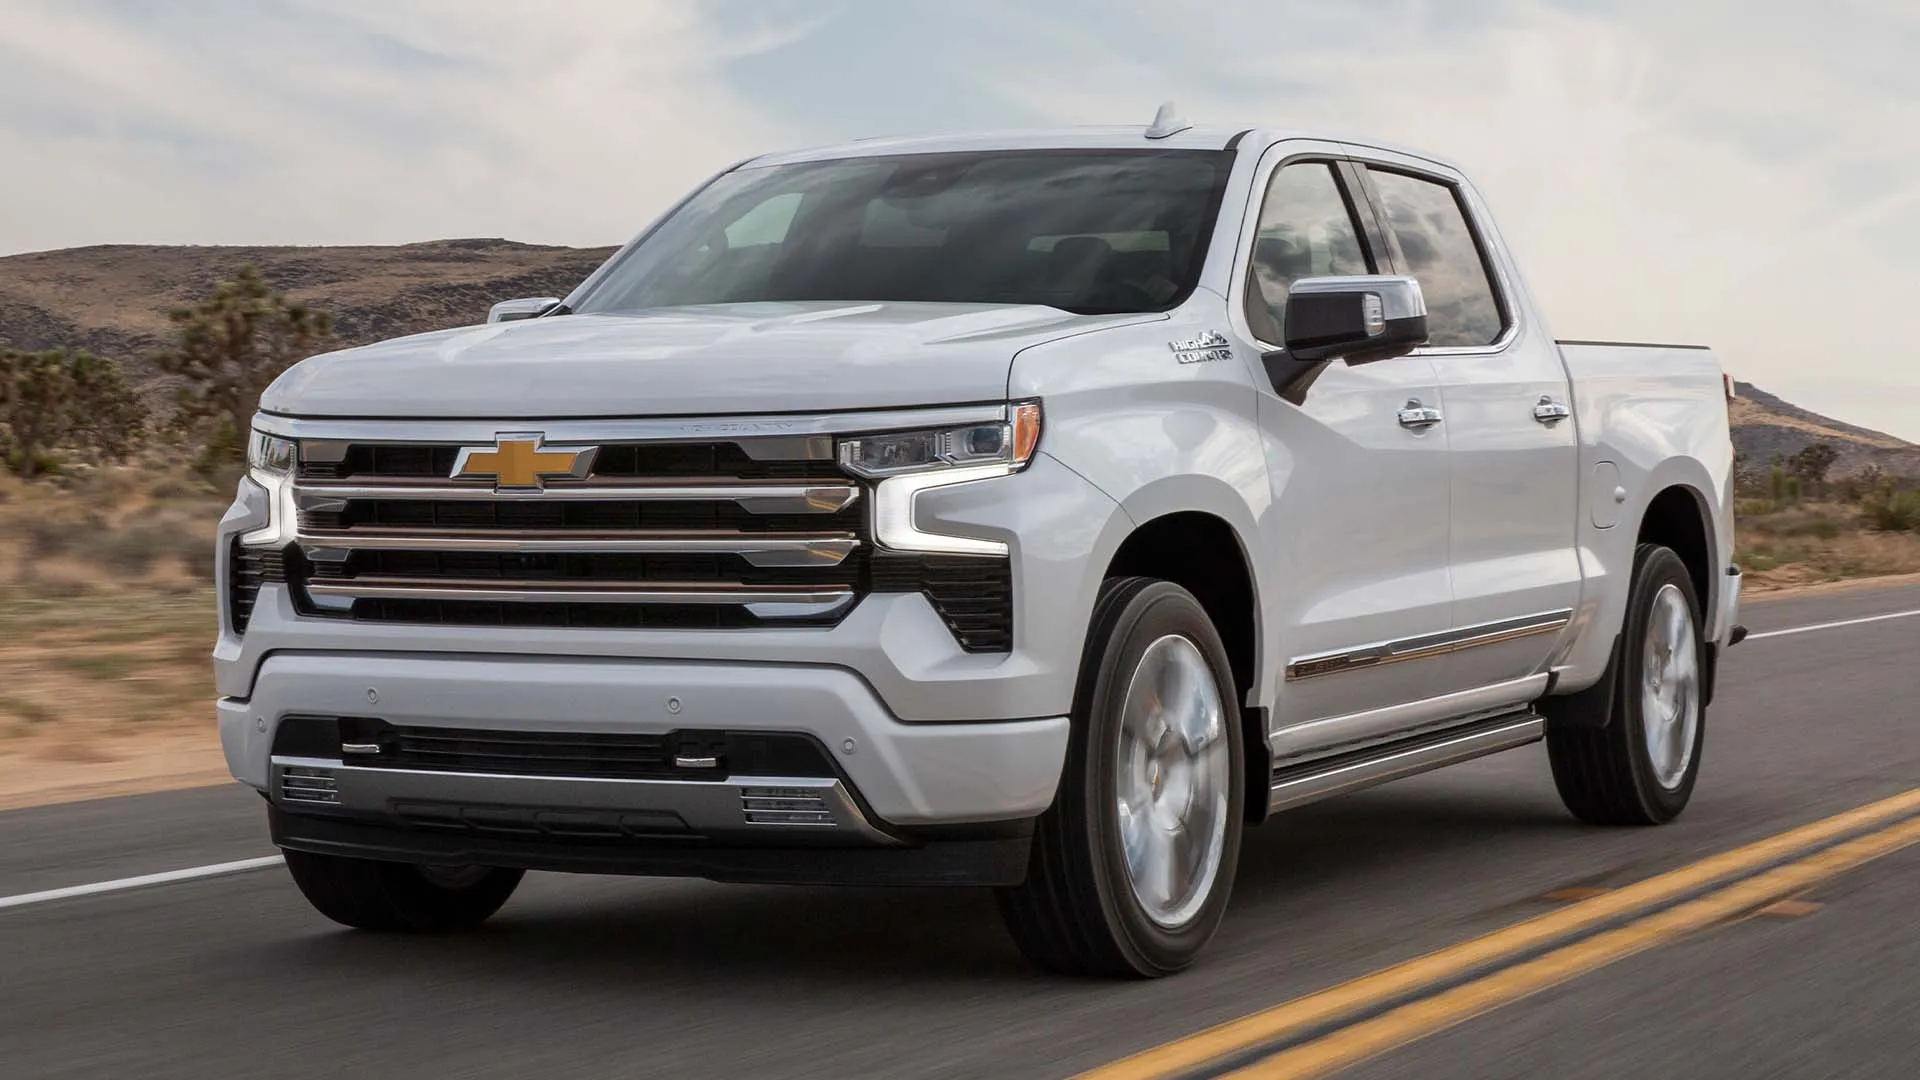 2023 Chevy Silverado The Ultimate Blend of Power and Innovation